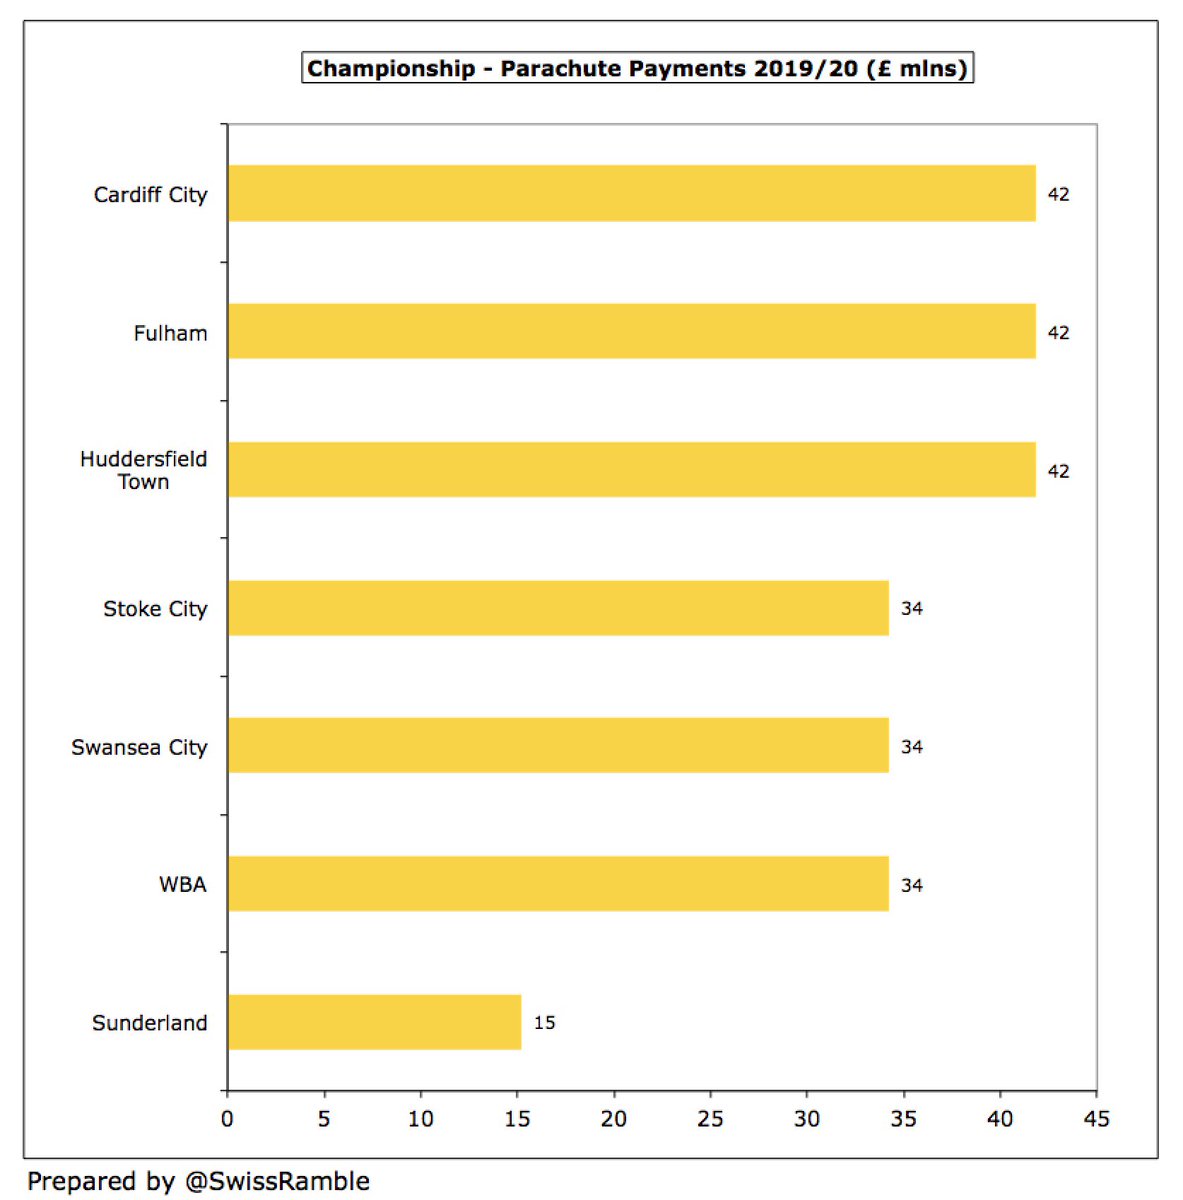 Following the growth,  #LUFC £54m revenue is the 5th highest in the Championship, only behind 4 clubs receiving parachute payments. Seven clubs benefited in 2019/20, led by Cardiff City,  #FFC £42m and  #HTAFC (£42m), followed by Stoke City, Swansea City and WBA (£34m).